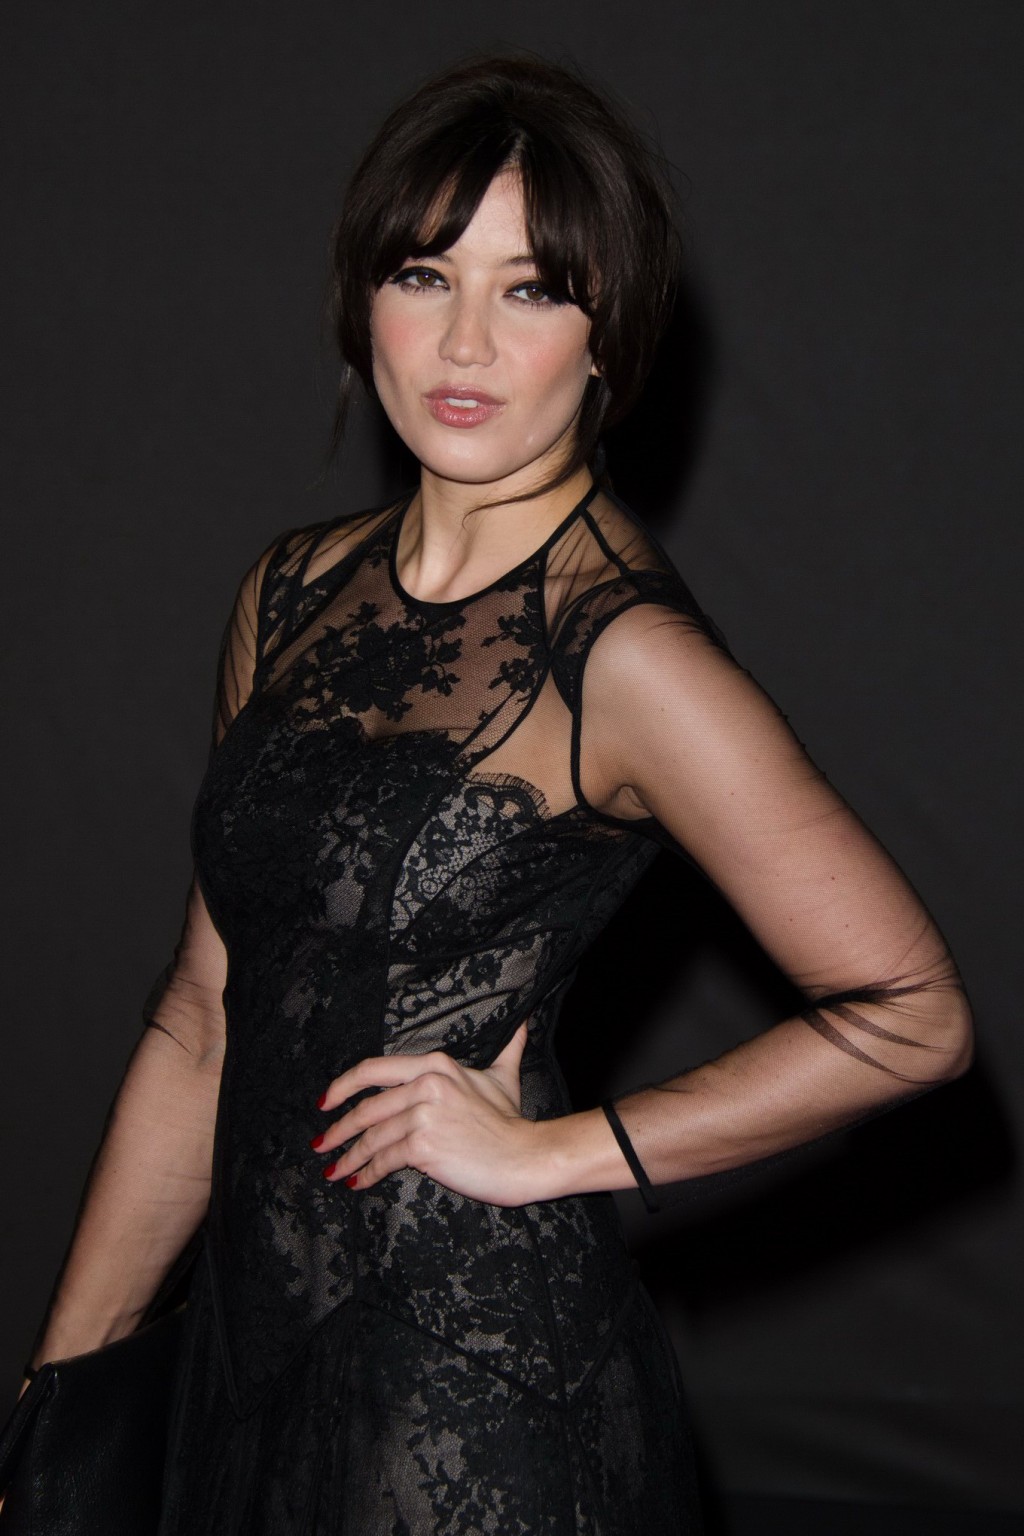 Daisy Lowe wearing black partially see-through dress at The British Fashion Awar #75211393